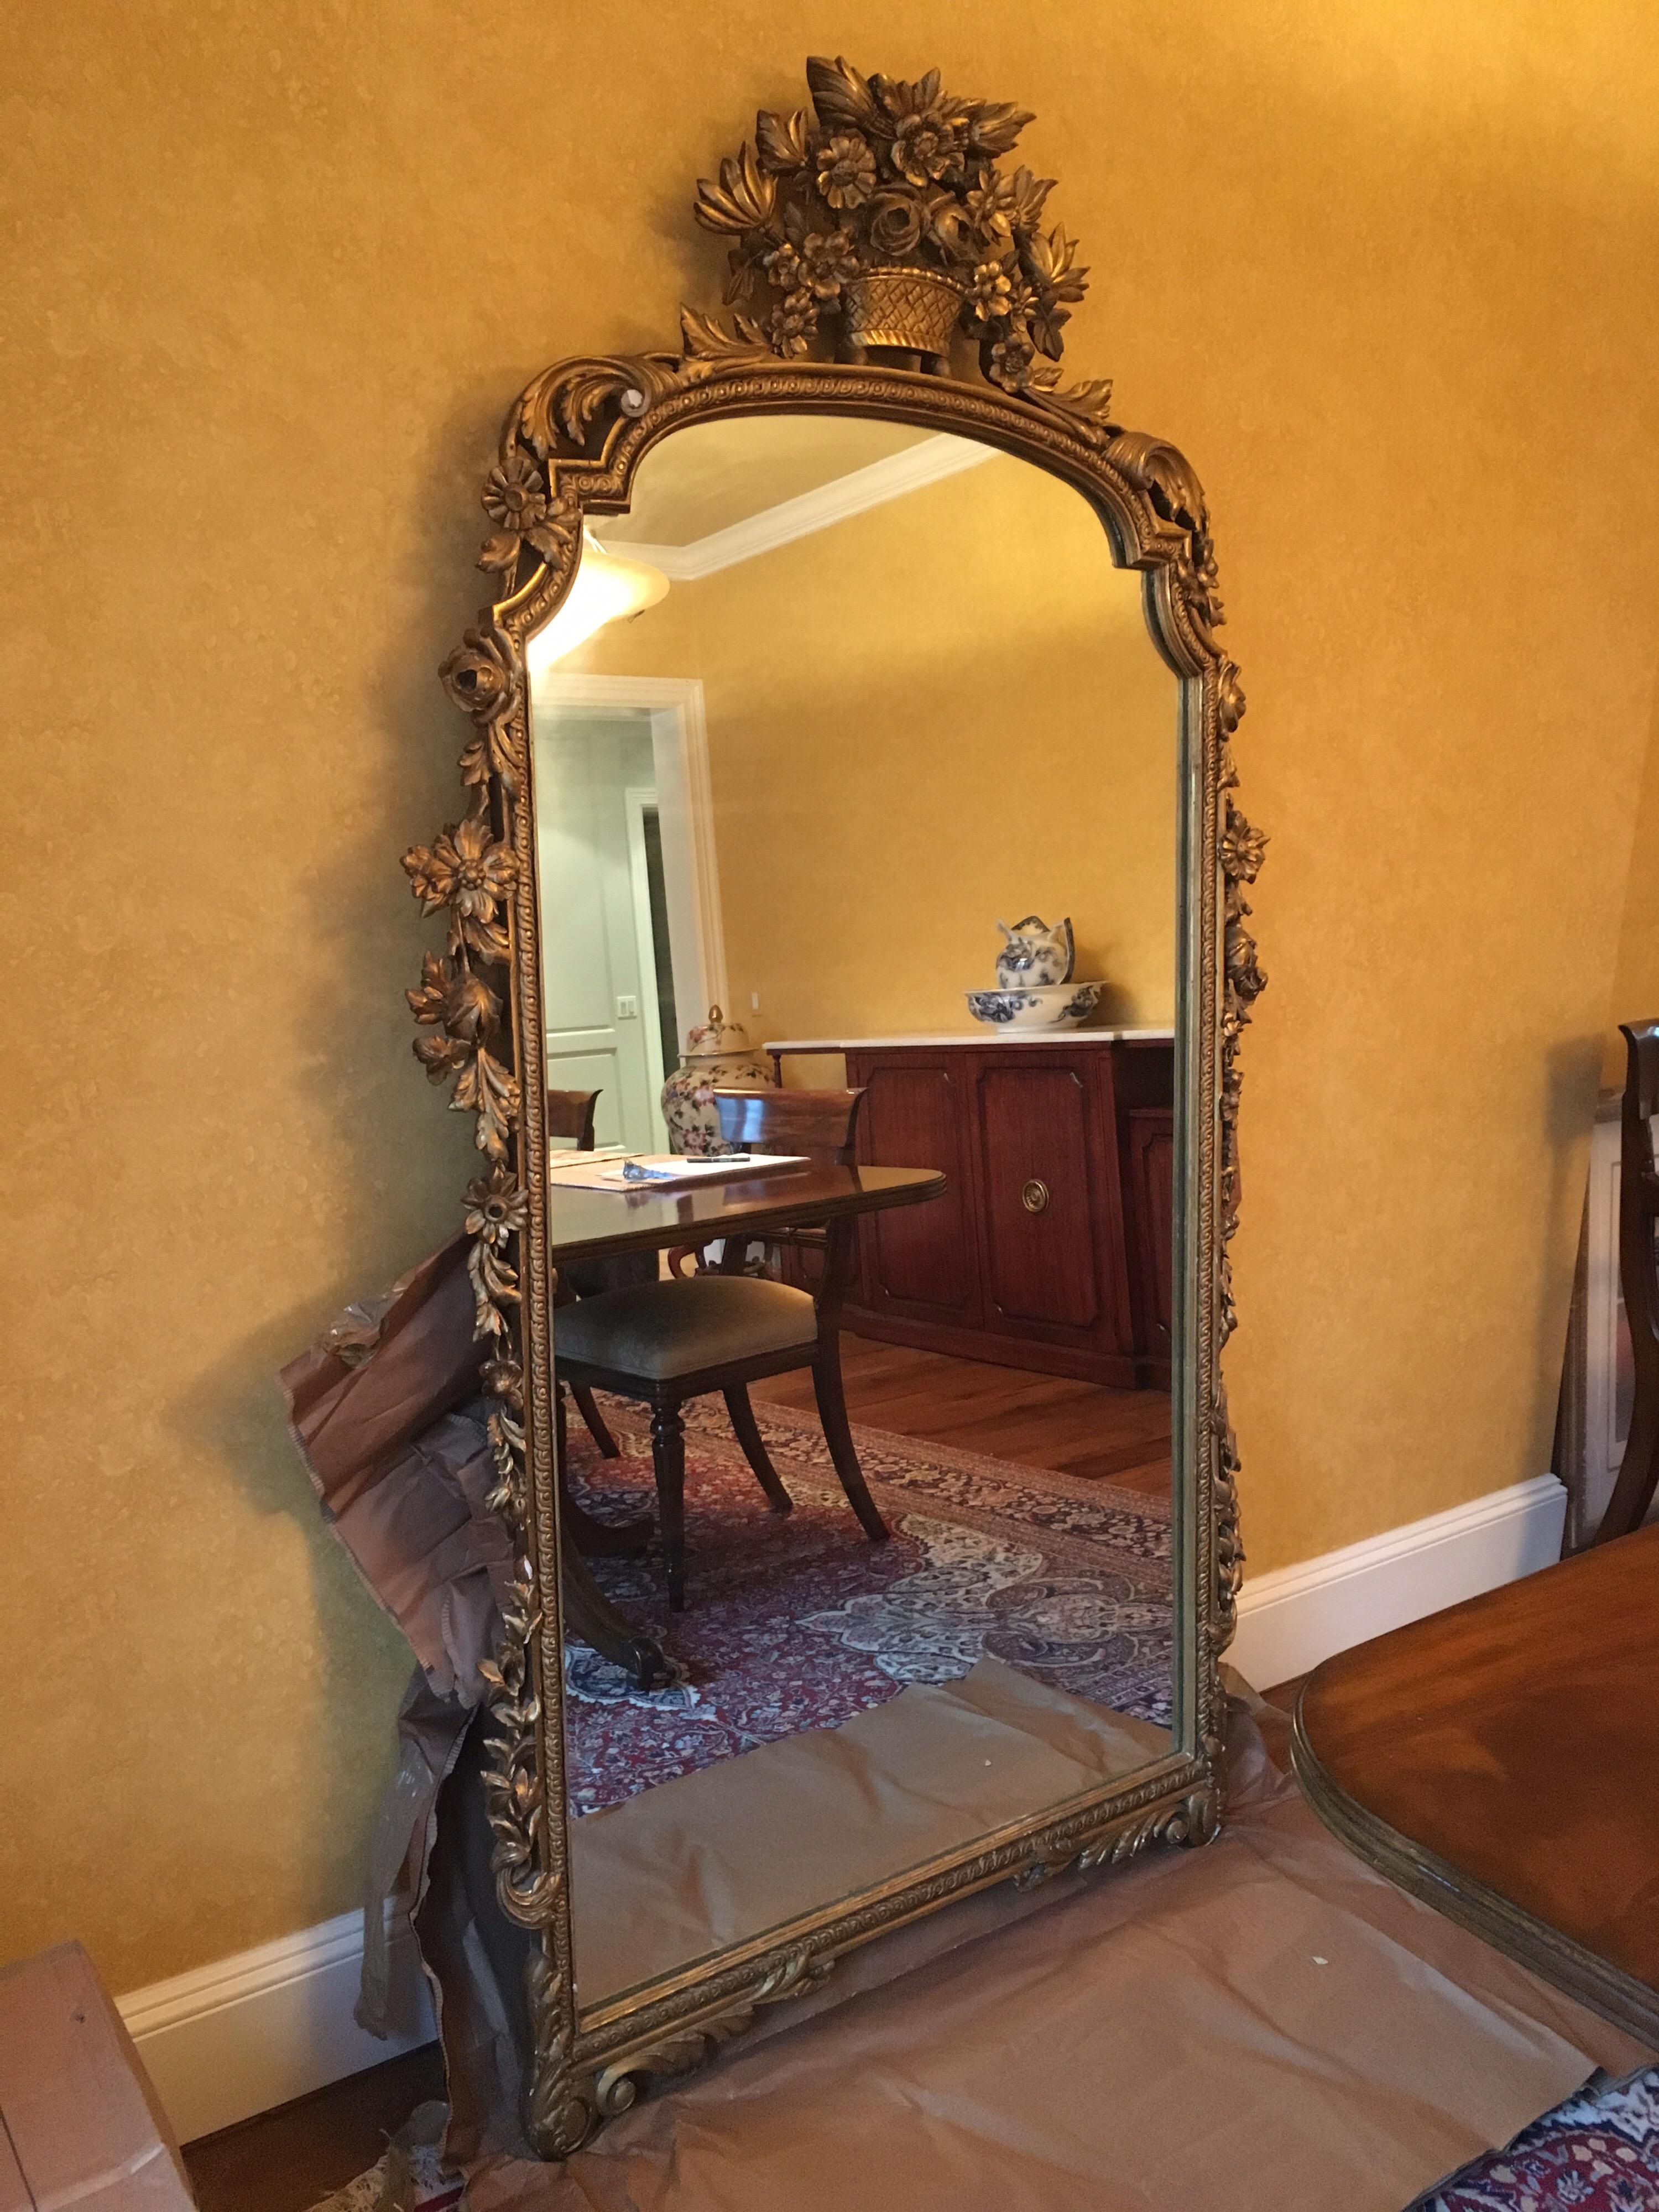 Large Continental gilt parlor mirror, 20th century, flower basket crest and pierce carved detail, gilded gesso. Two available, sold separately. Loss to gilt and small chips to frame have broken off in some areas. Notice top left corner in image